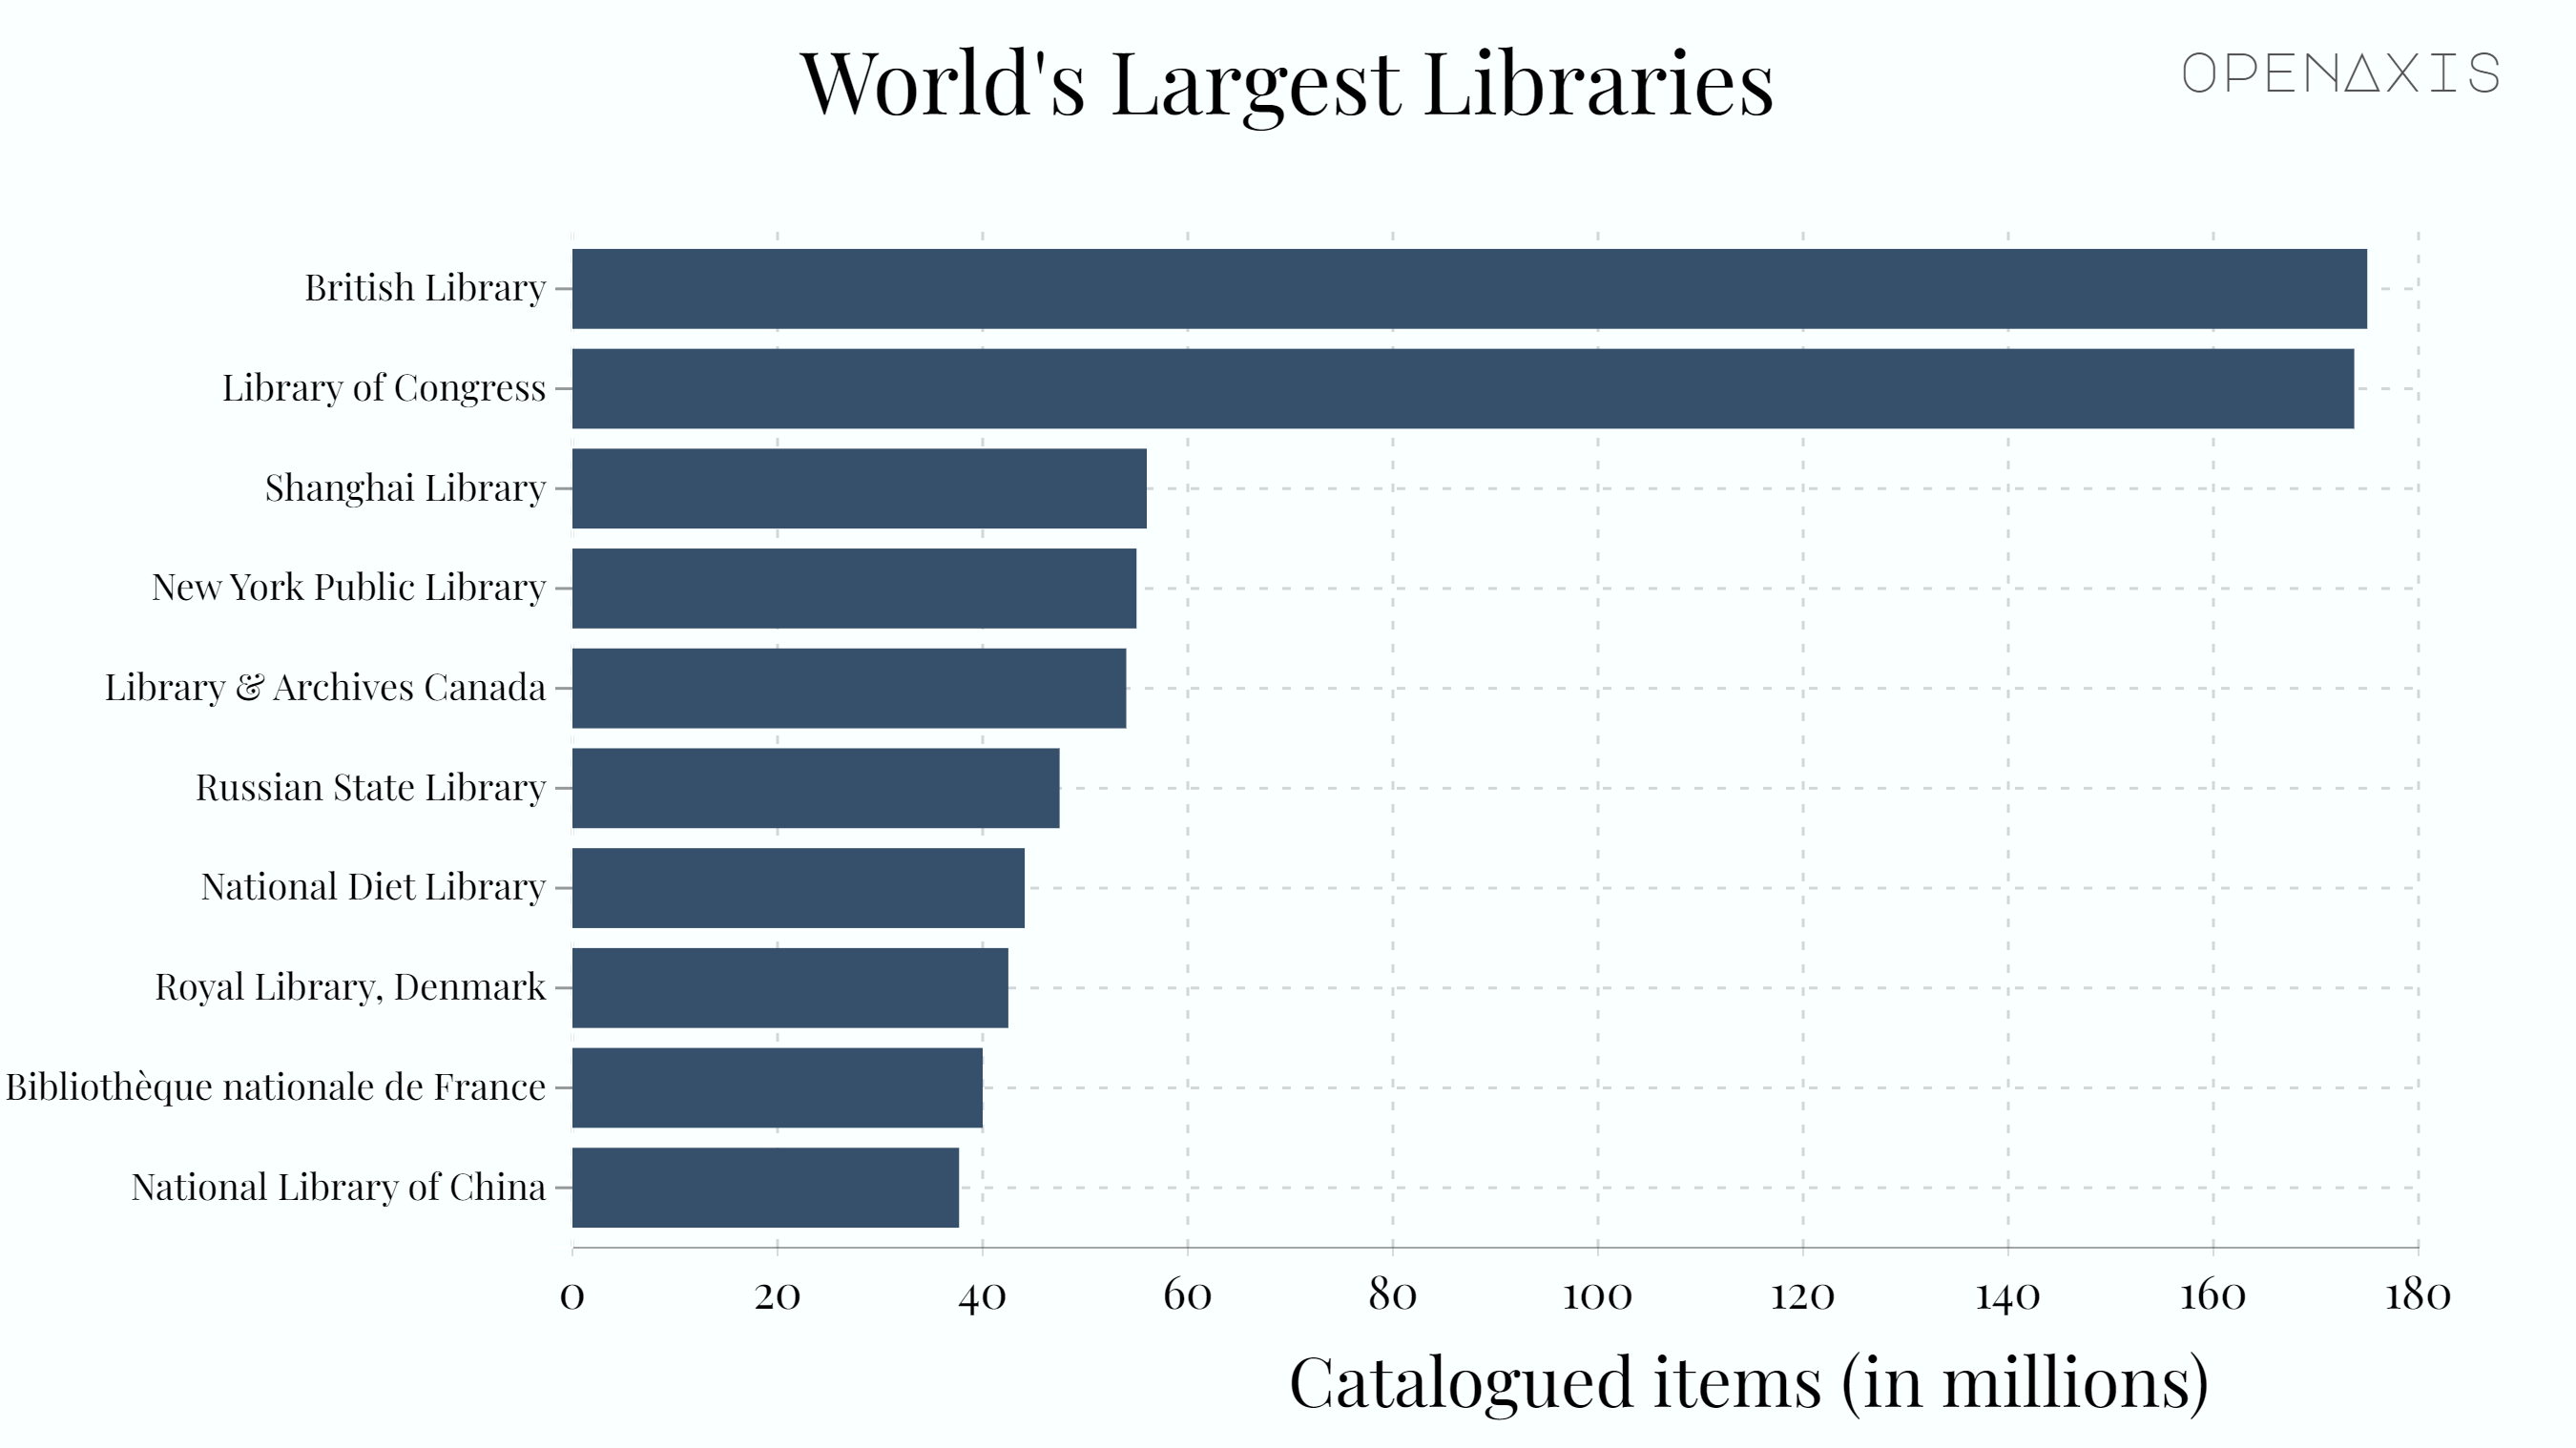 "World's Largest Libraries"